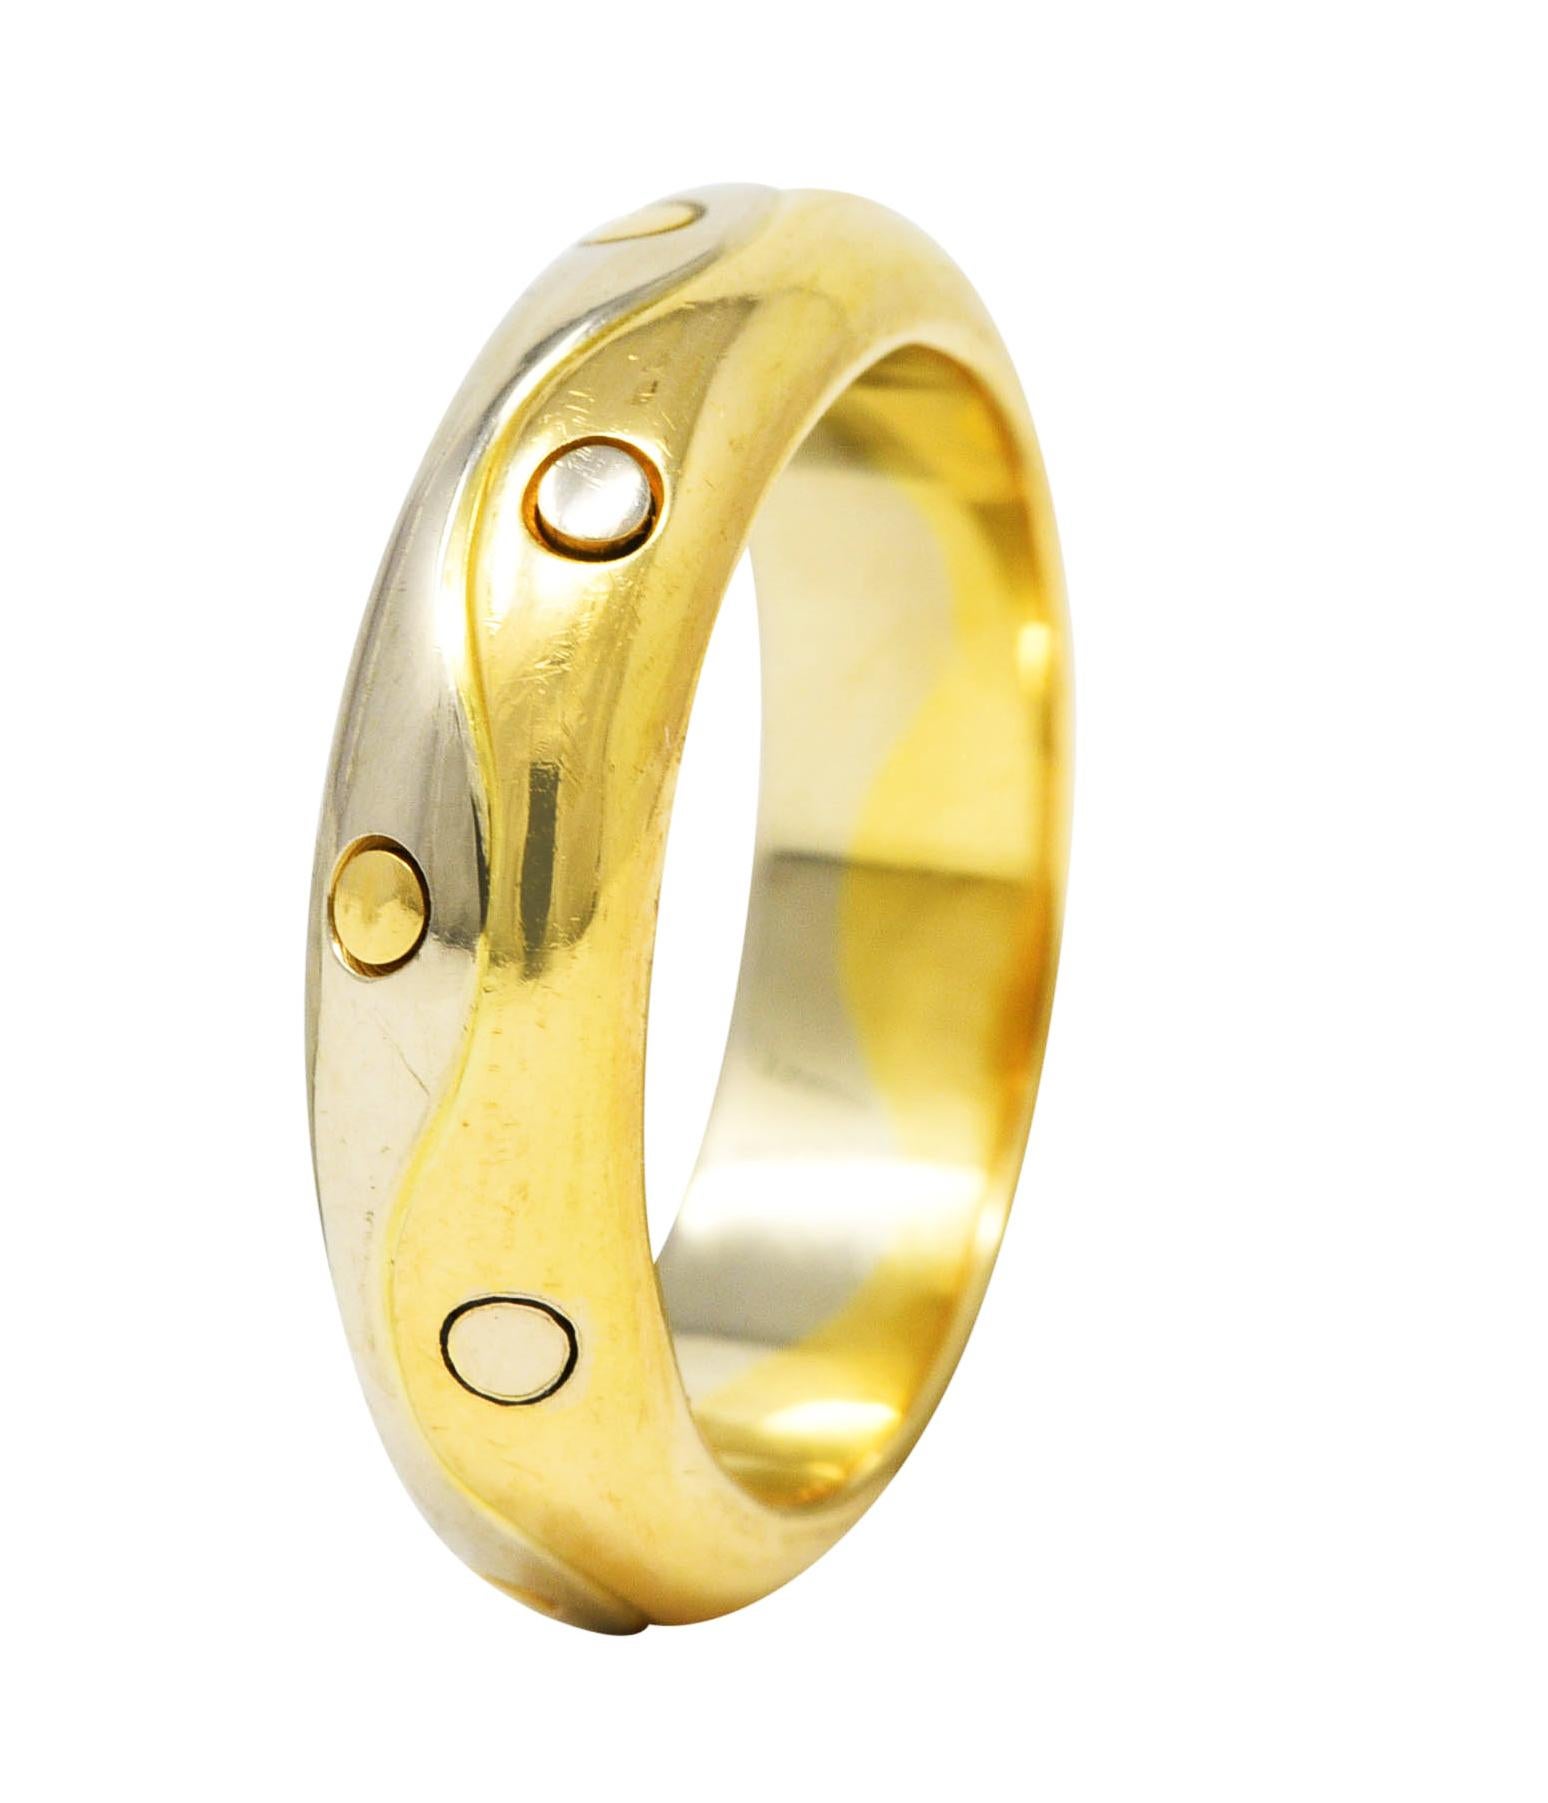 Band ring is designed as yellow and white gold halves. With grooved wave motif median and spots of alternating gold color. Stamped 750 for 18 karat gold. Fully signed Bvlgari, Made in Italy. Circa: 1990's from the Onda collection. Ring size: 6 and